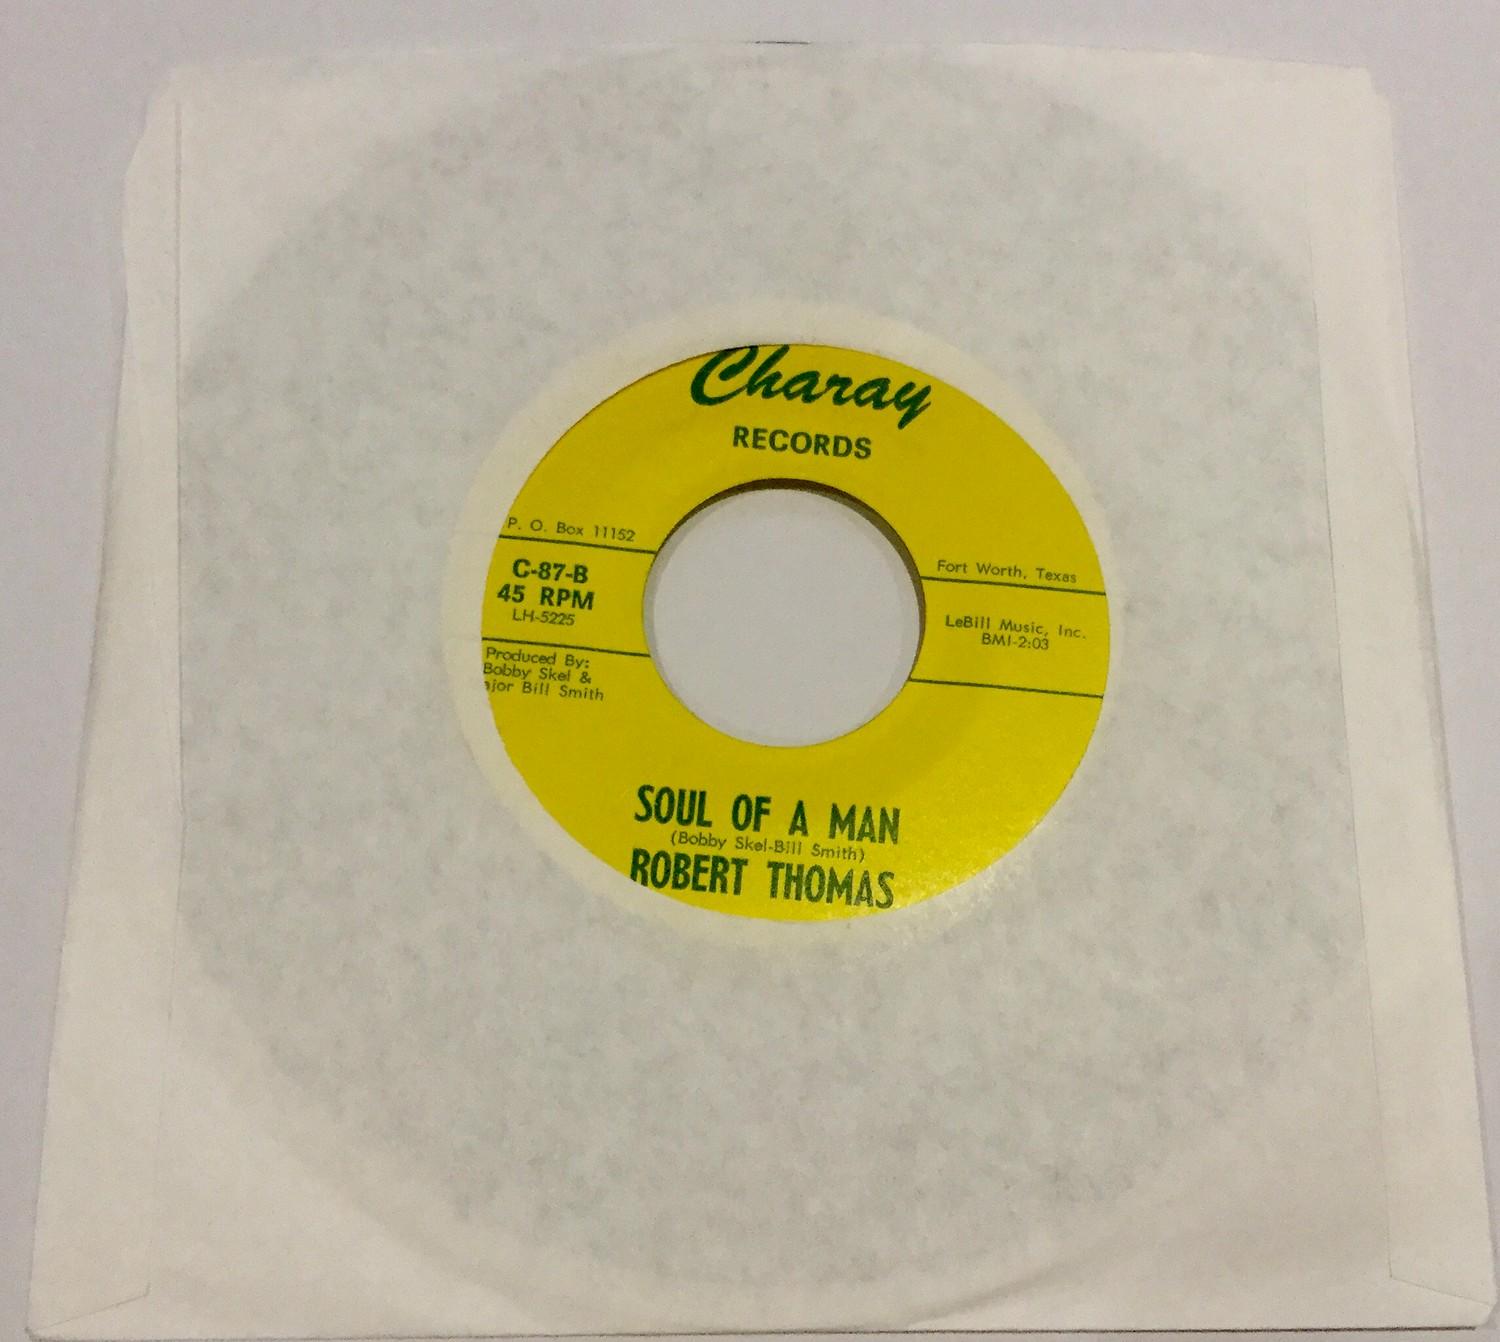 ROBERT THOMAS 7? NORTHERN SOUL SINGLE. ?Salvation/Soul Of A Man? on Charay C-87 is a banger of a